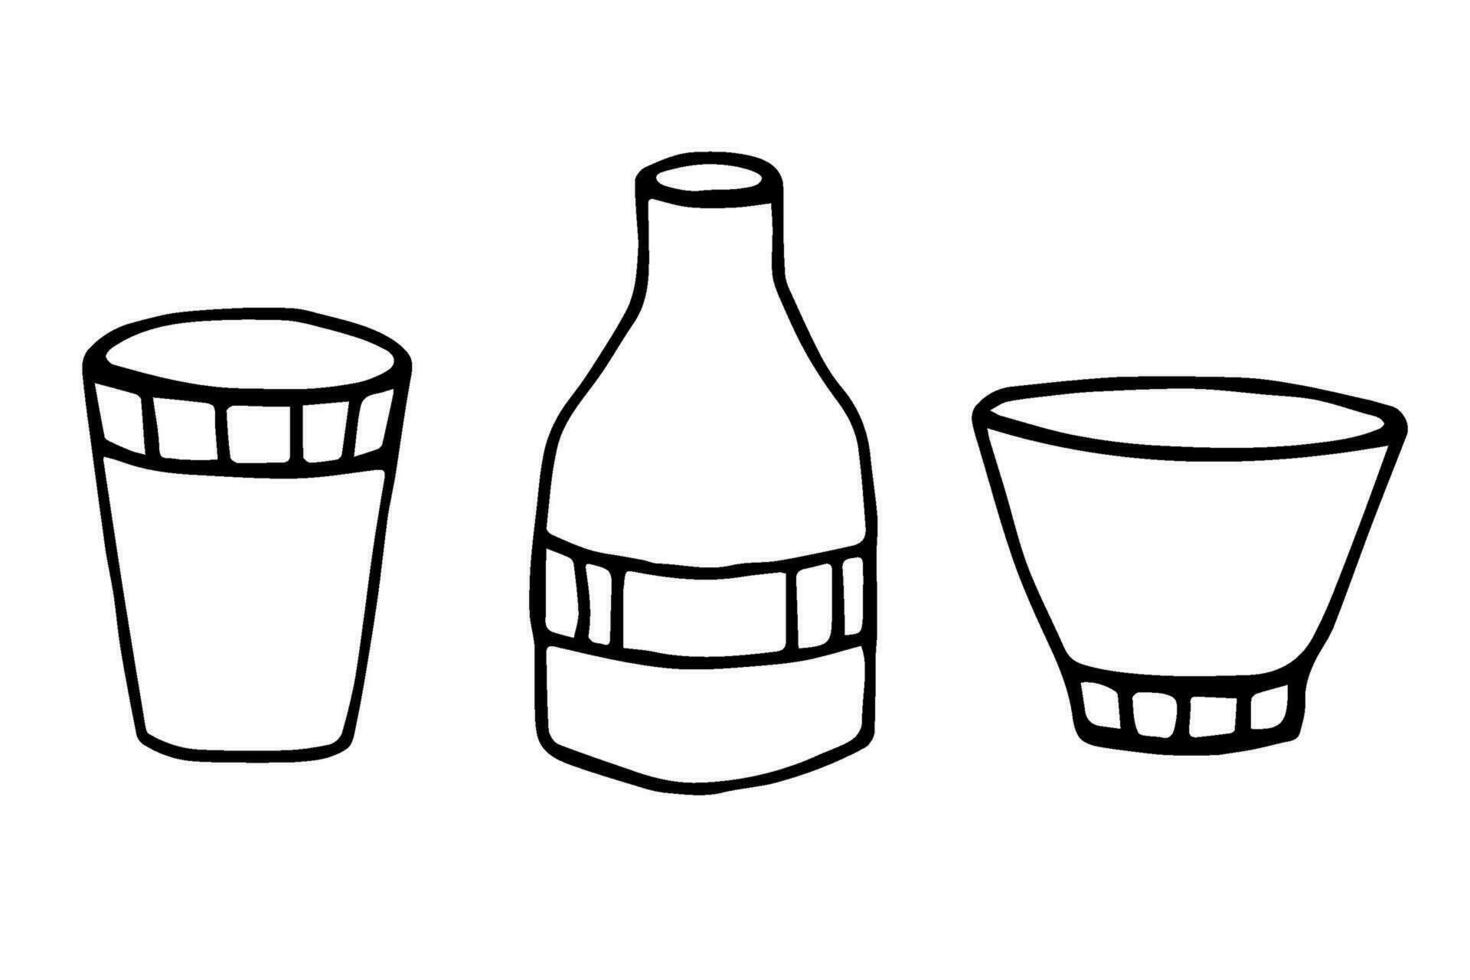 Hand drawn black outline vector doodle set of dishes on a white background. Glass, bottle, bowl. For the design of kitchens, cafes, menus, drinks, labels.